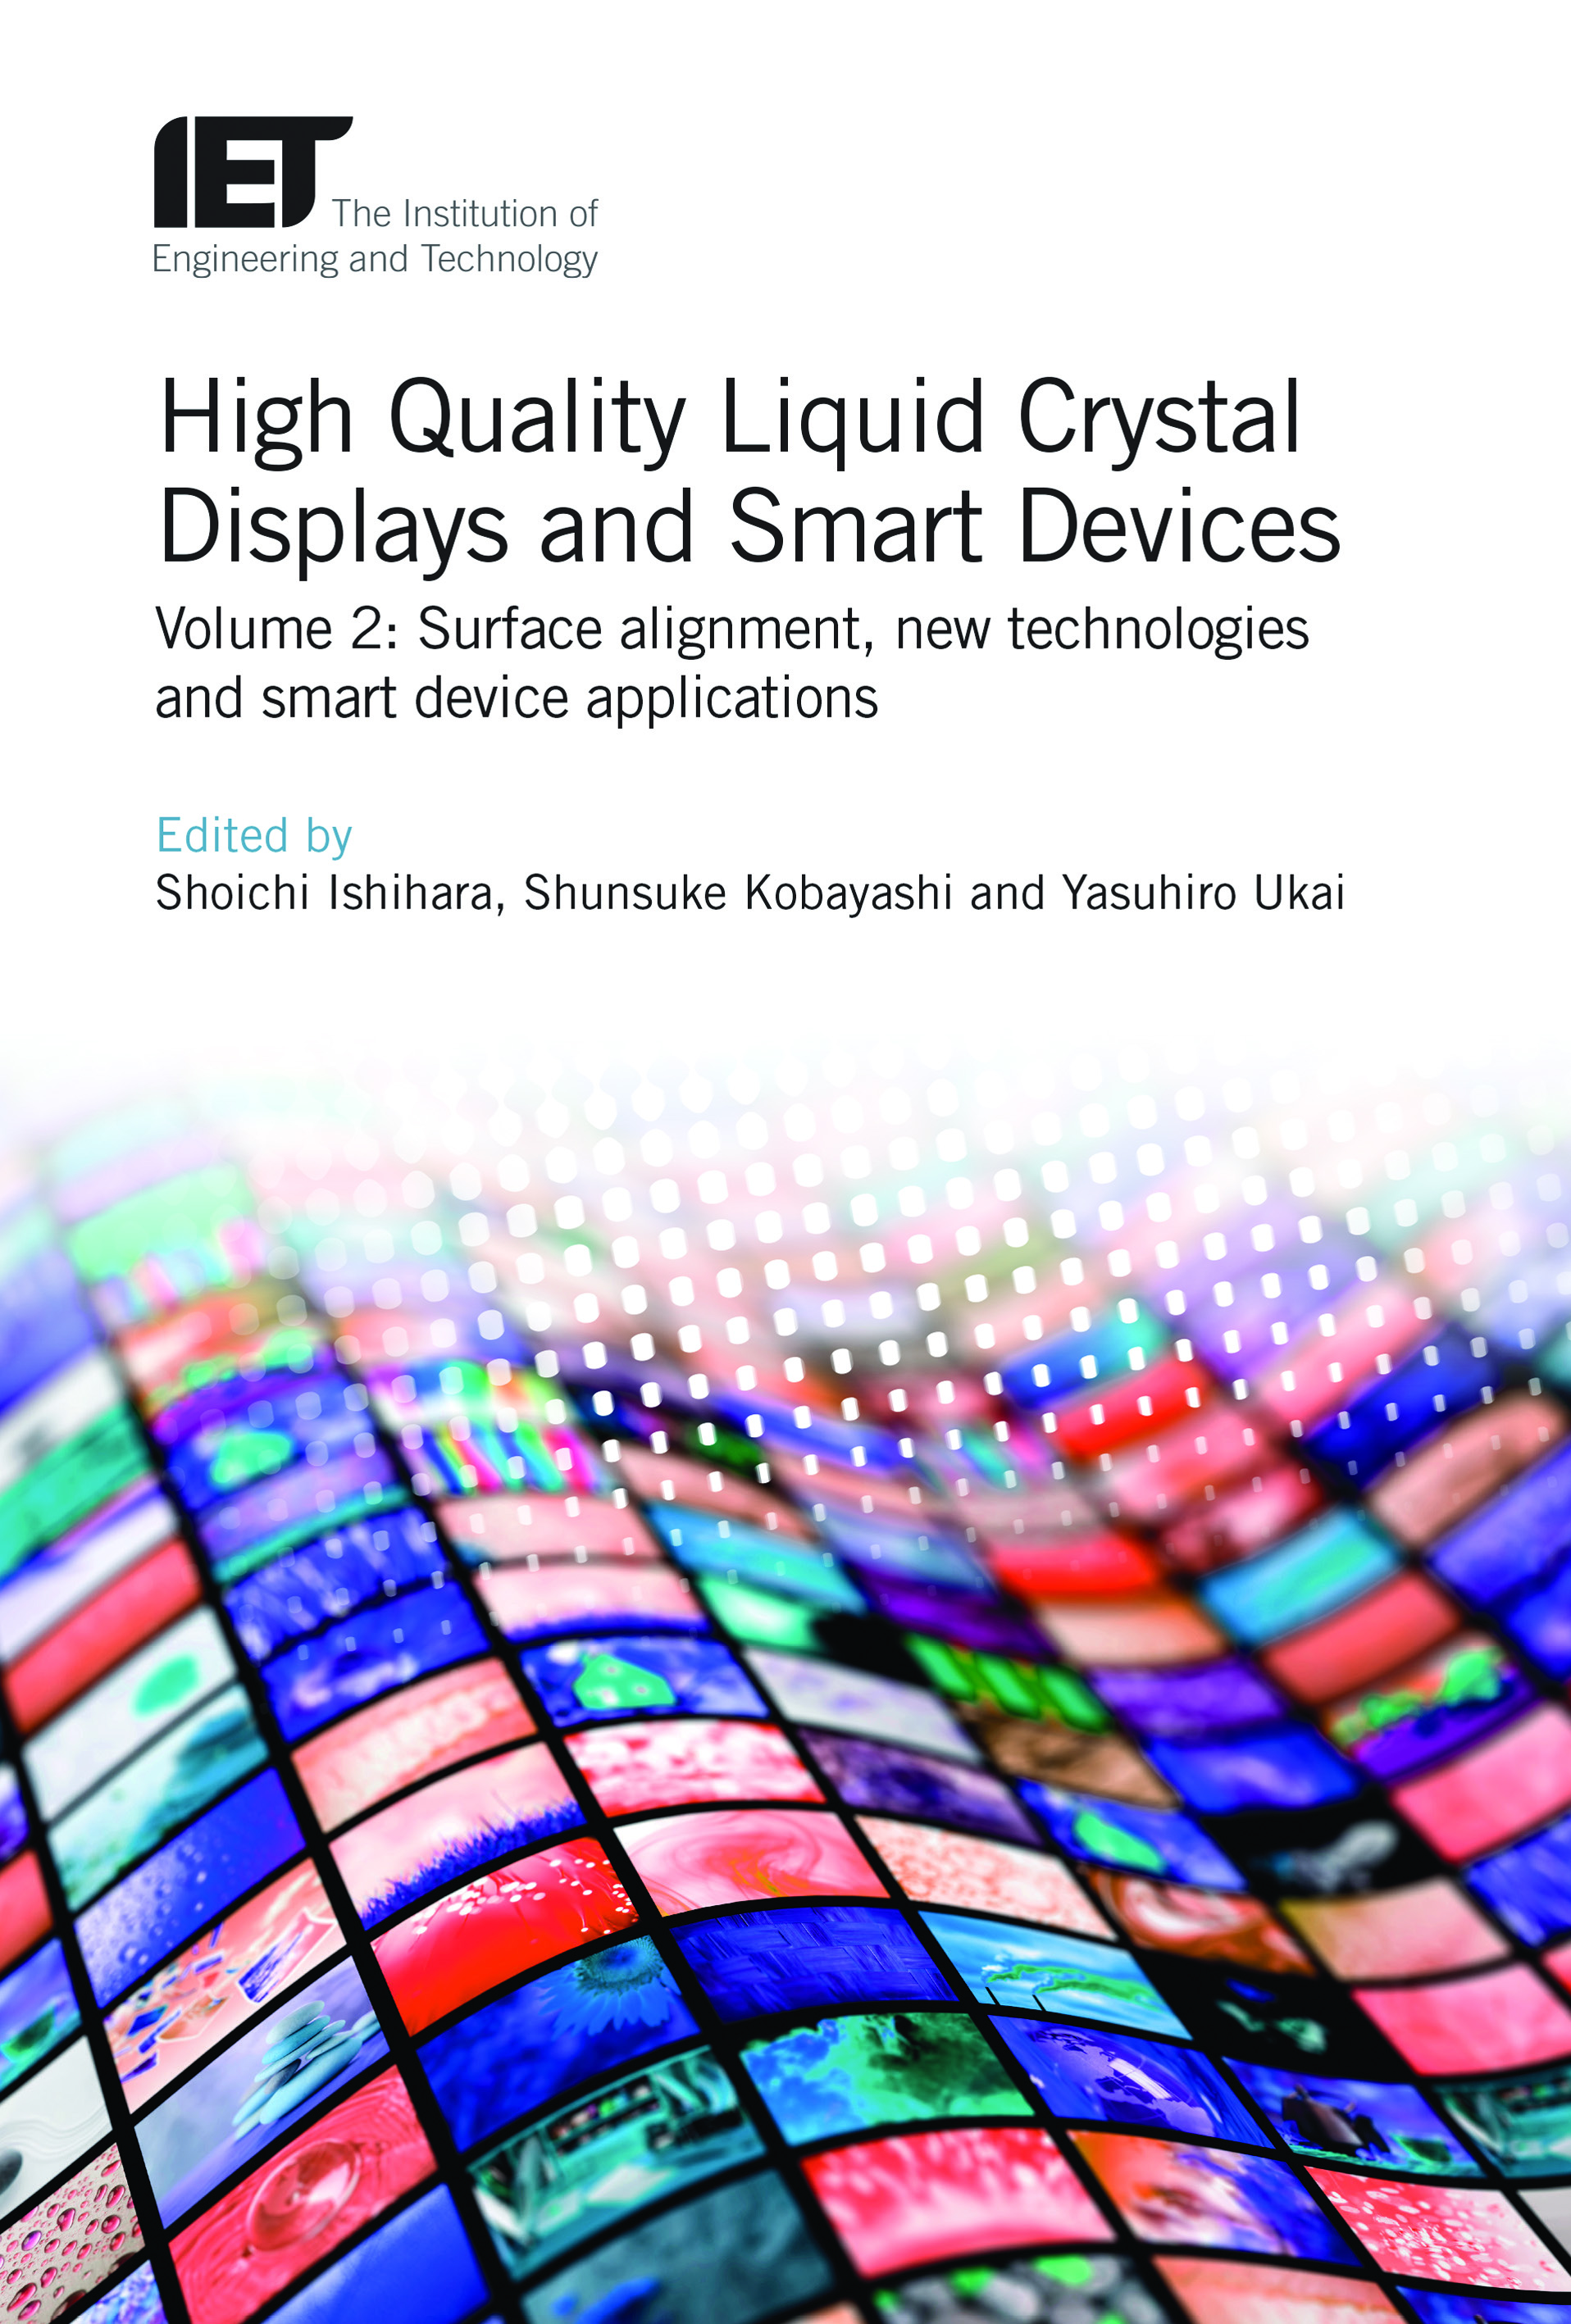 High Quality Liquid Crystal Displays and Smart Devices, Volume 2: Surface alignment, new technologies and smart device applications